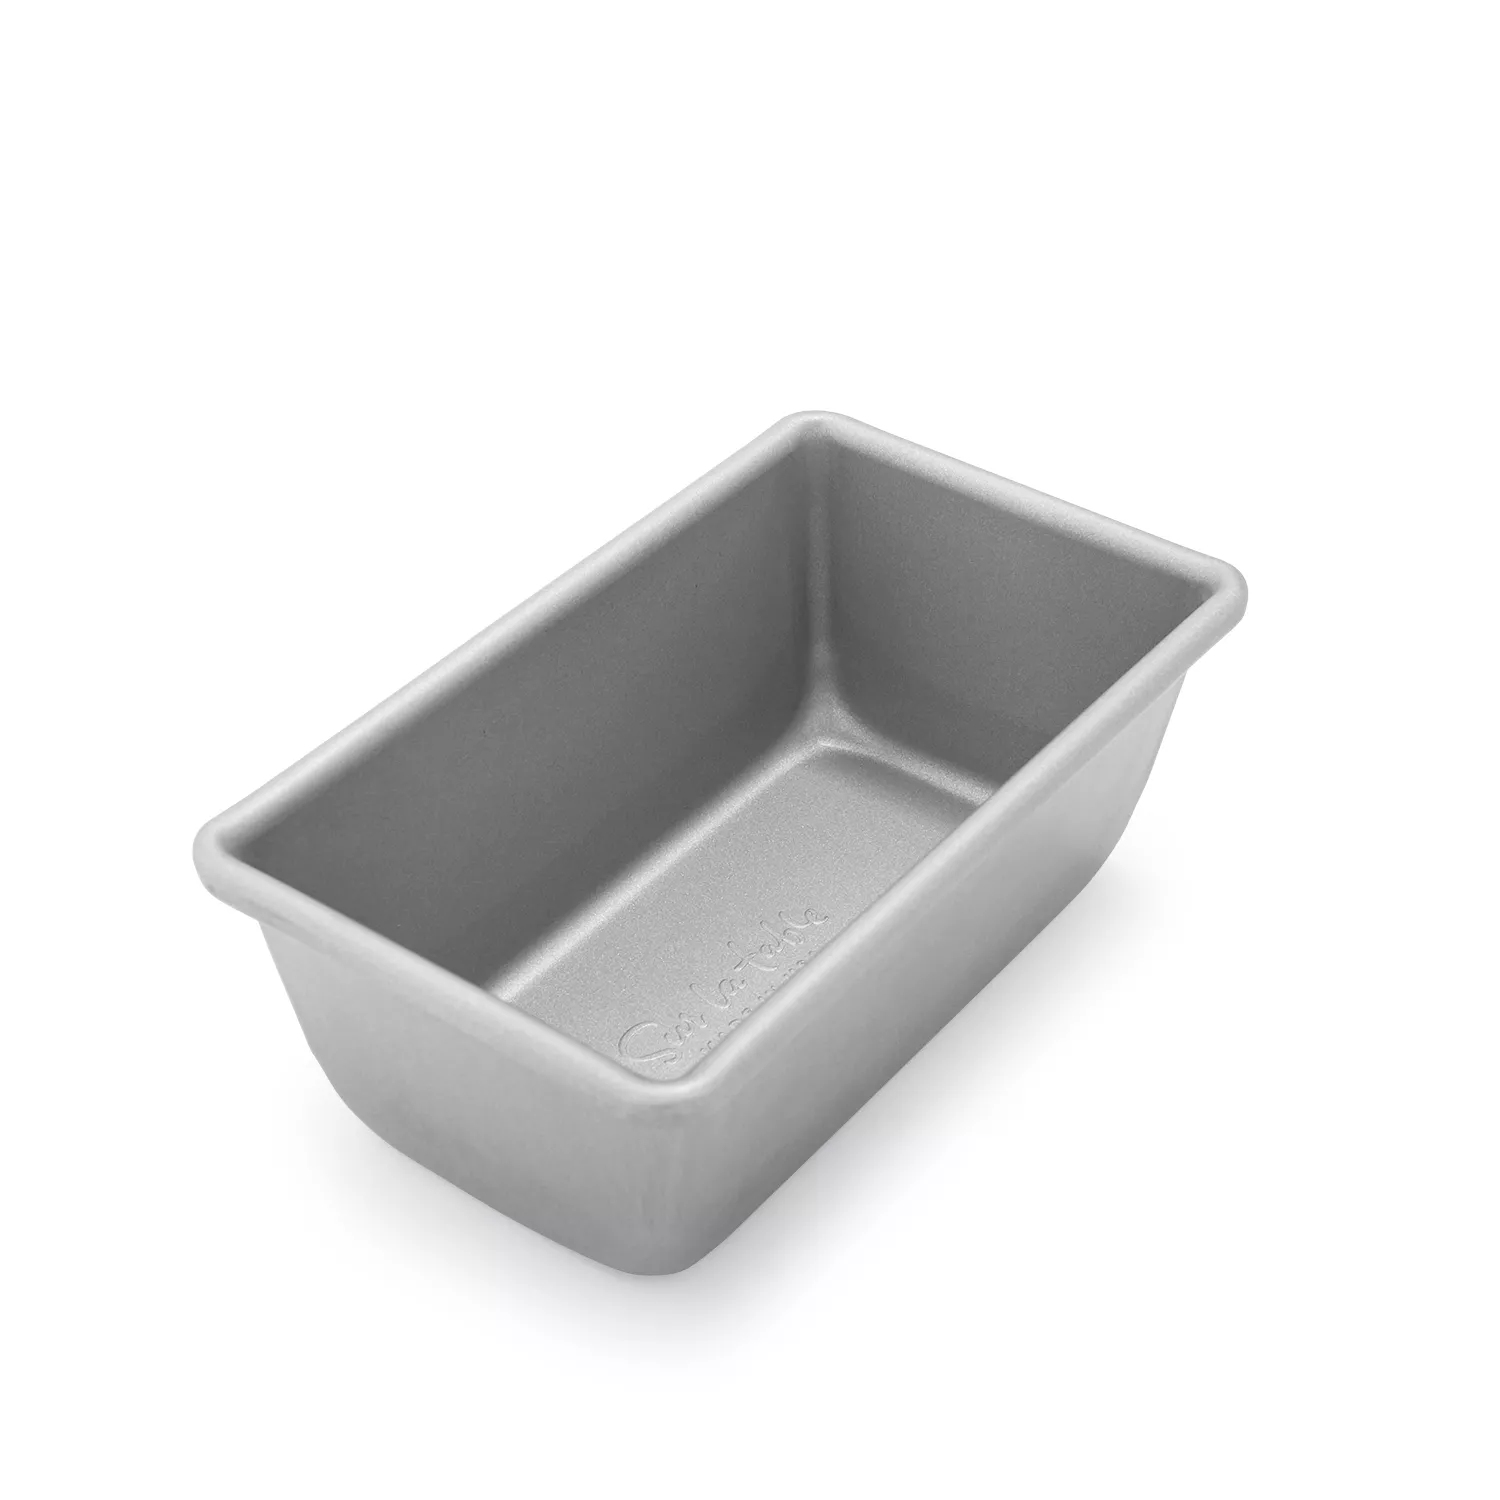 6 ounce Individual Size Colored Mini Loaf Pan- #4004NL